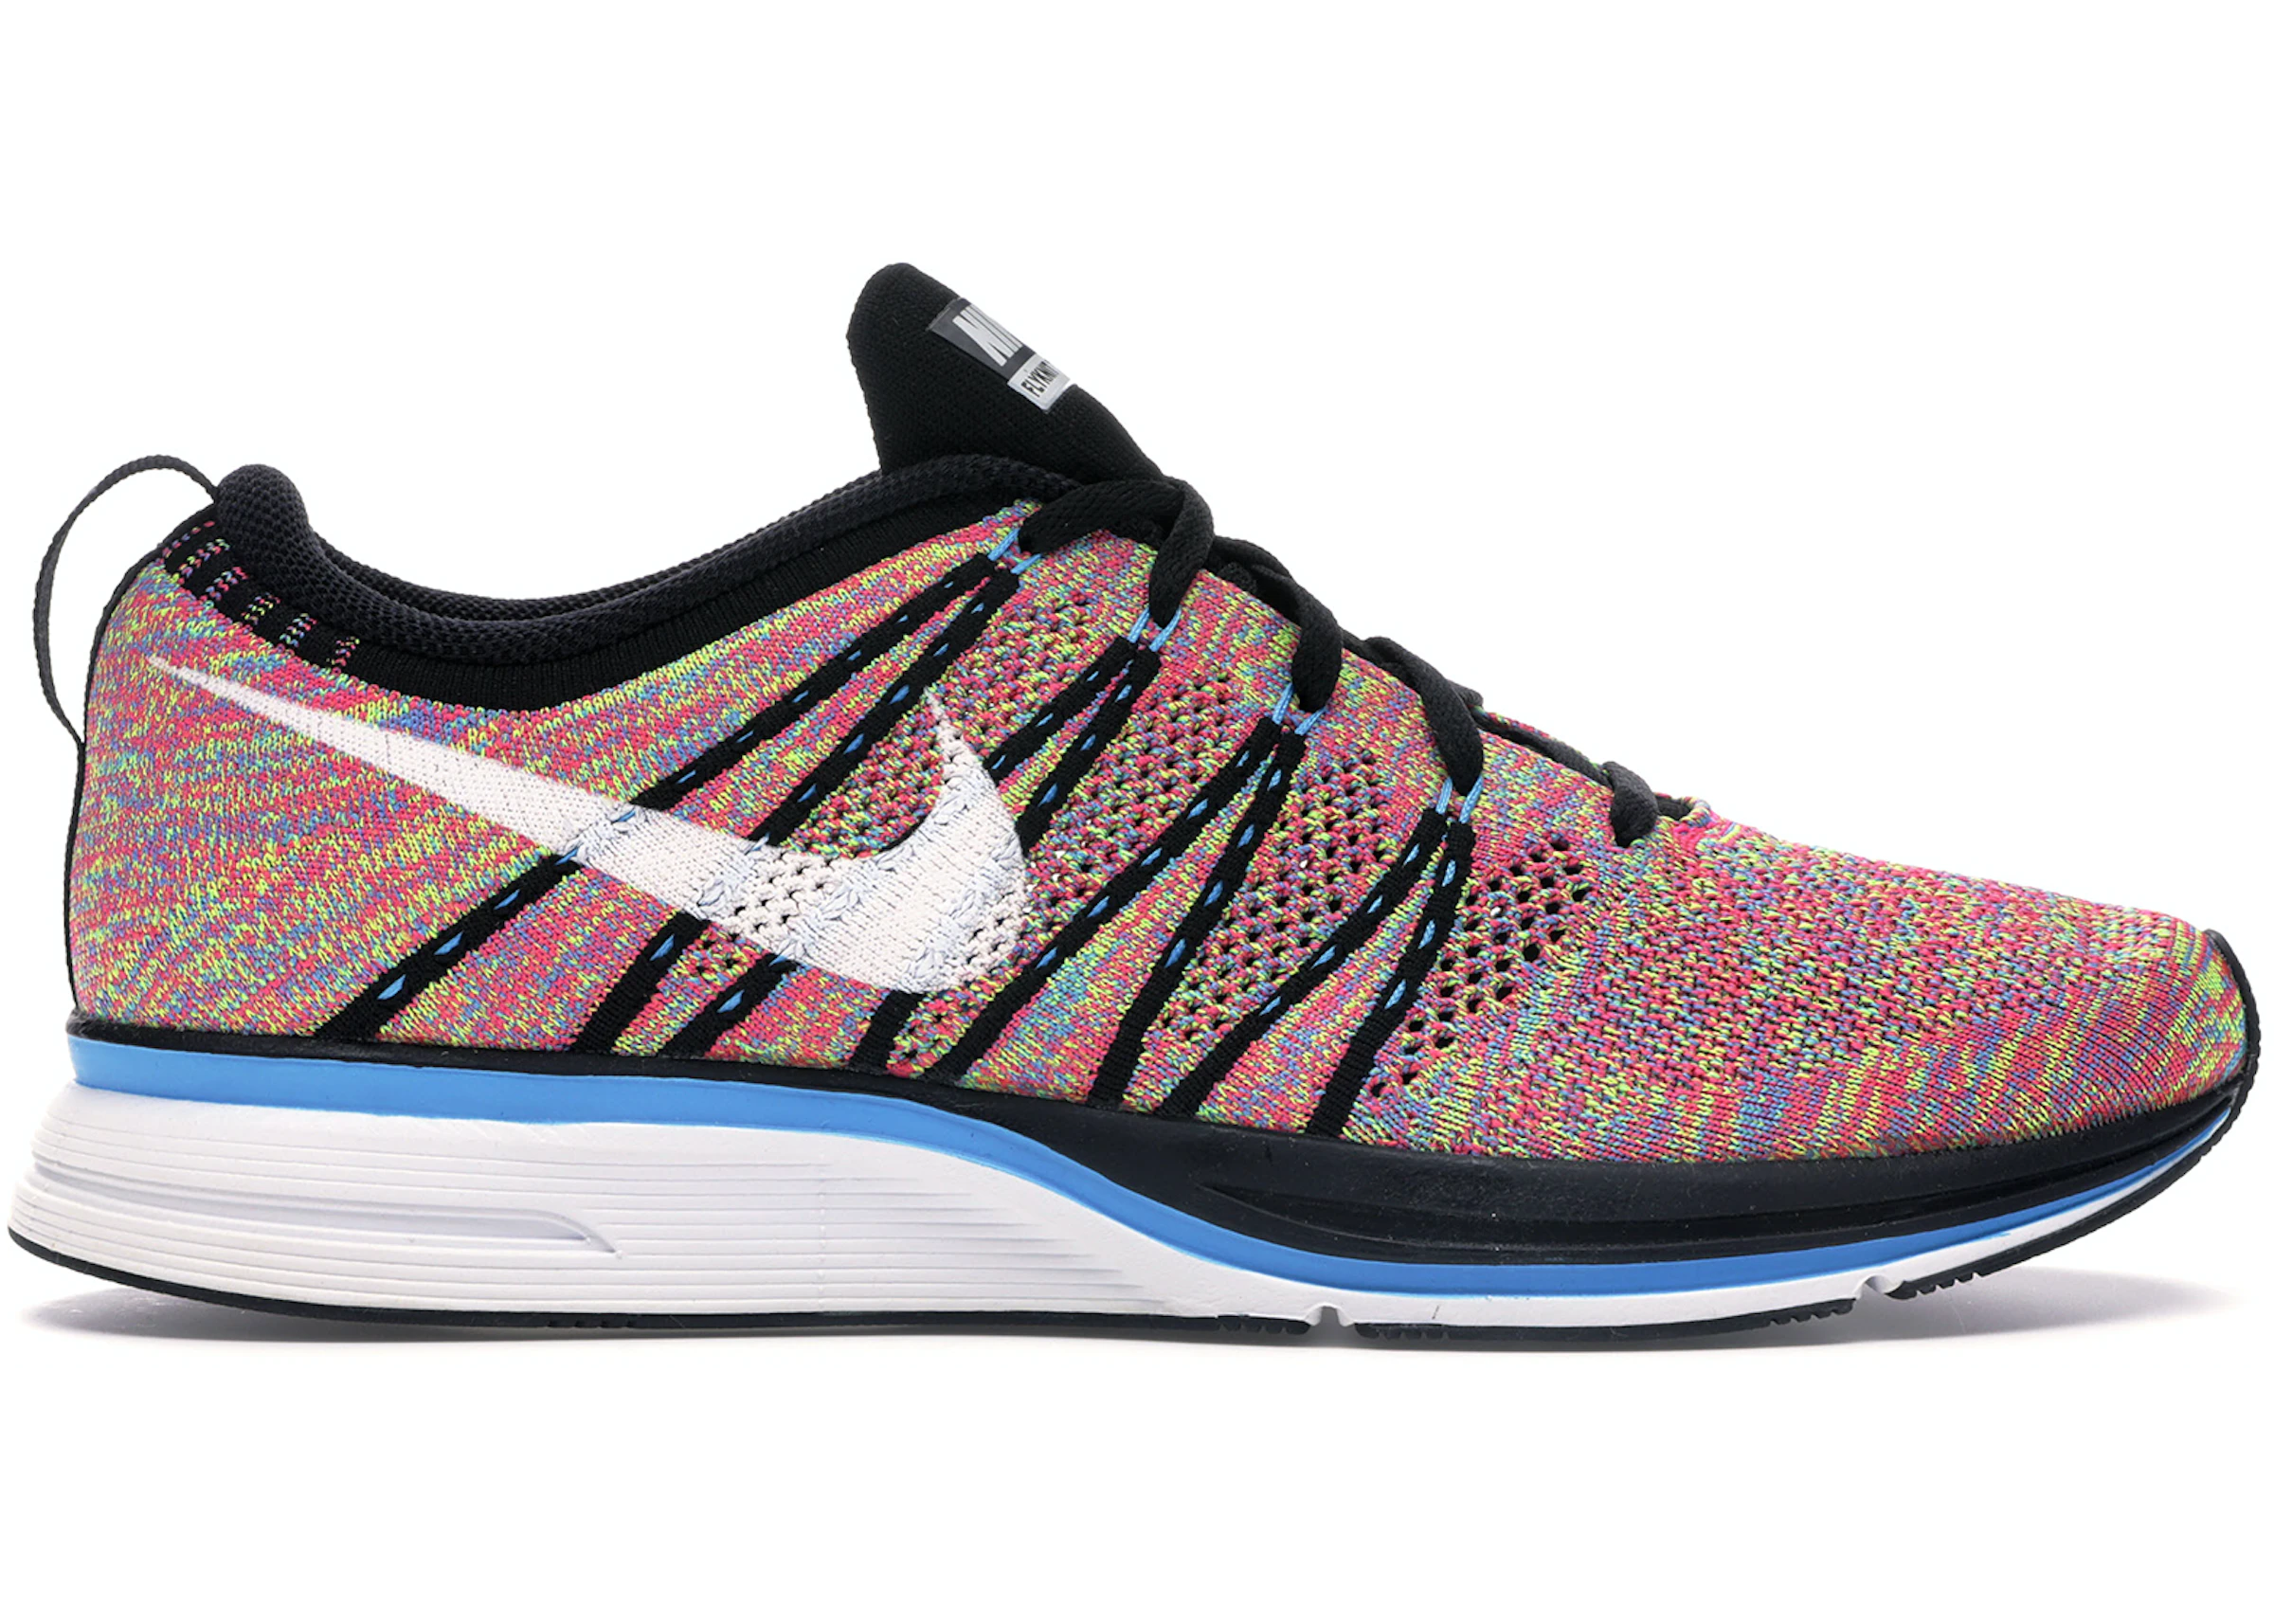 Nike Flyknit Trainer Multi-Color - 532984-014 -